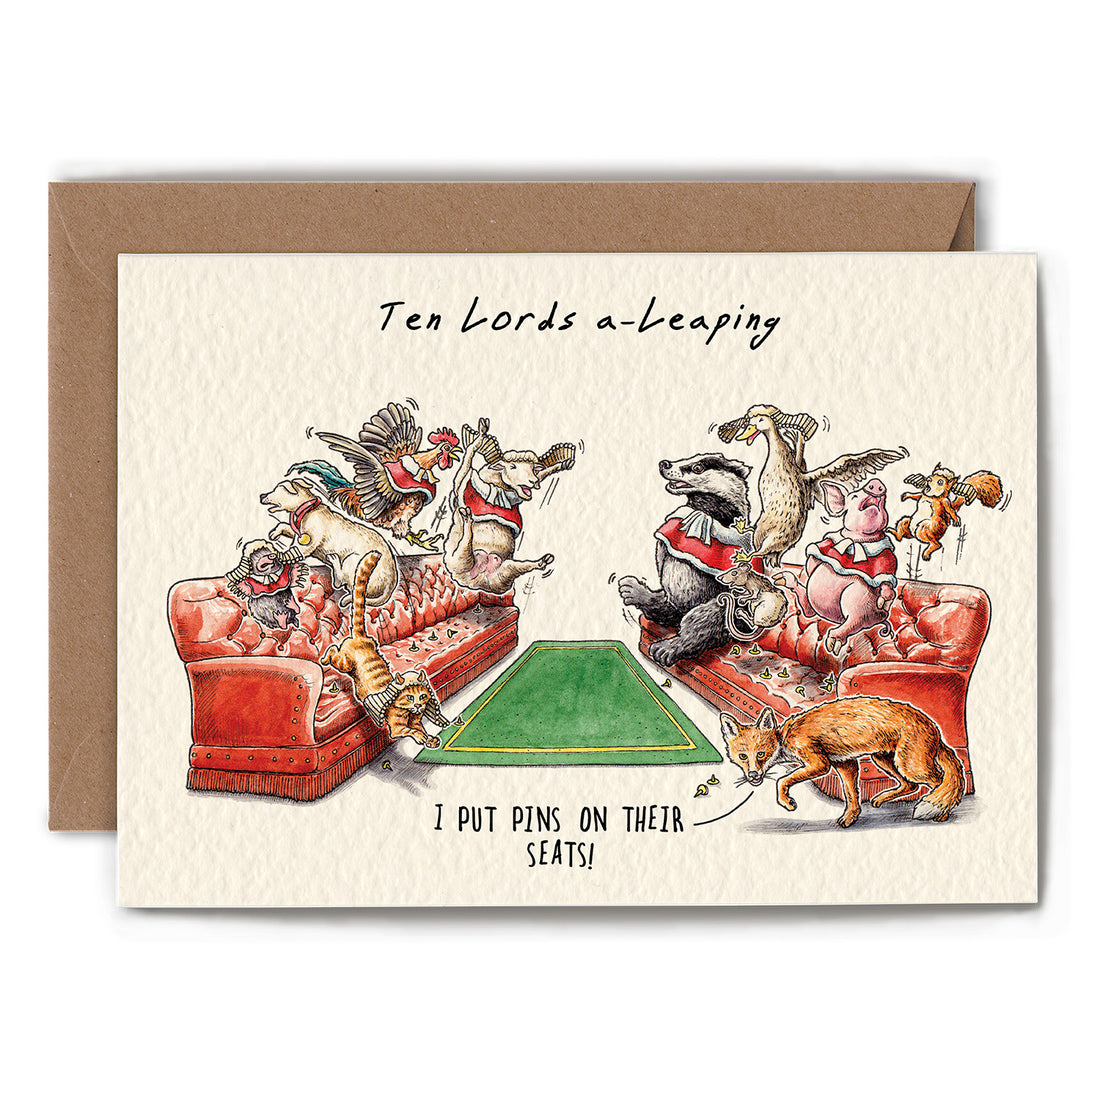 Illustration on a Hester &amp; Cook Ten Lords Leaping Card of anthropomorphized animals, specifically Bewilderbeests, leaping from couches with the caption &quot;Ten lords a-leaping - I put pins on their seats!